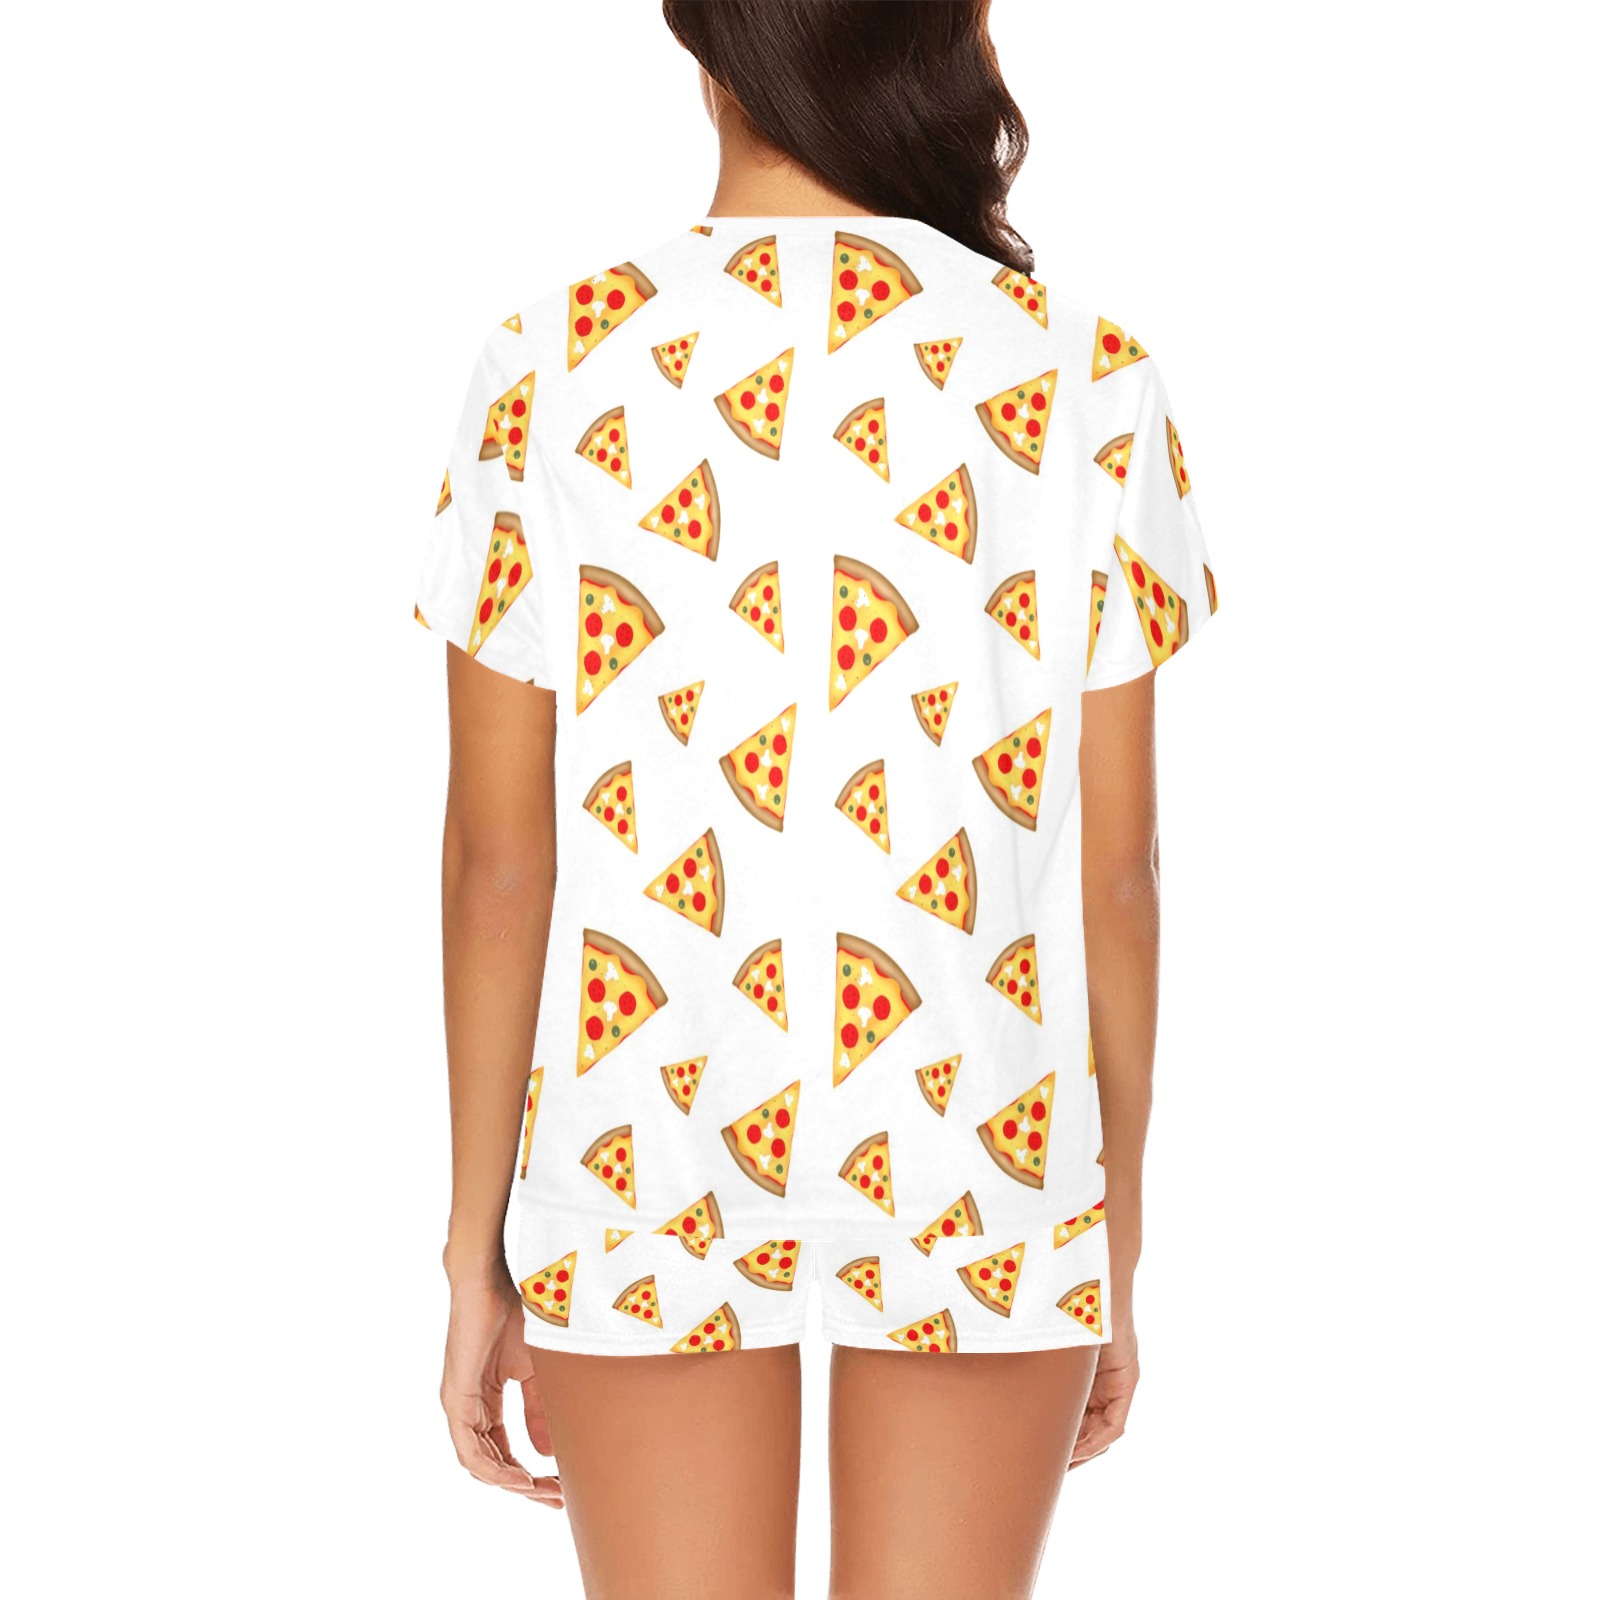 Cool and fun pizza slices pattern on white Women's Short Pajama Set